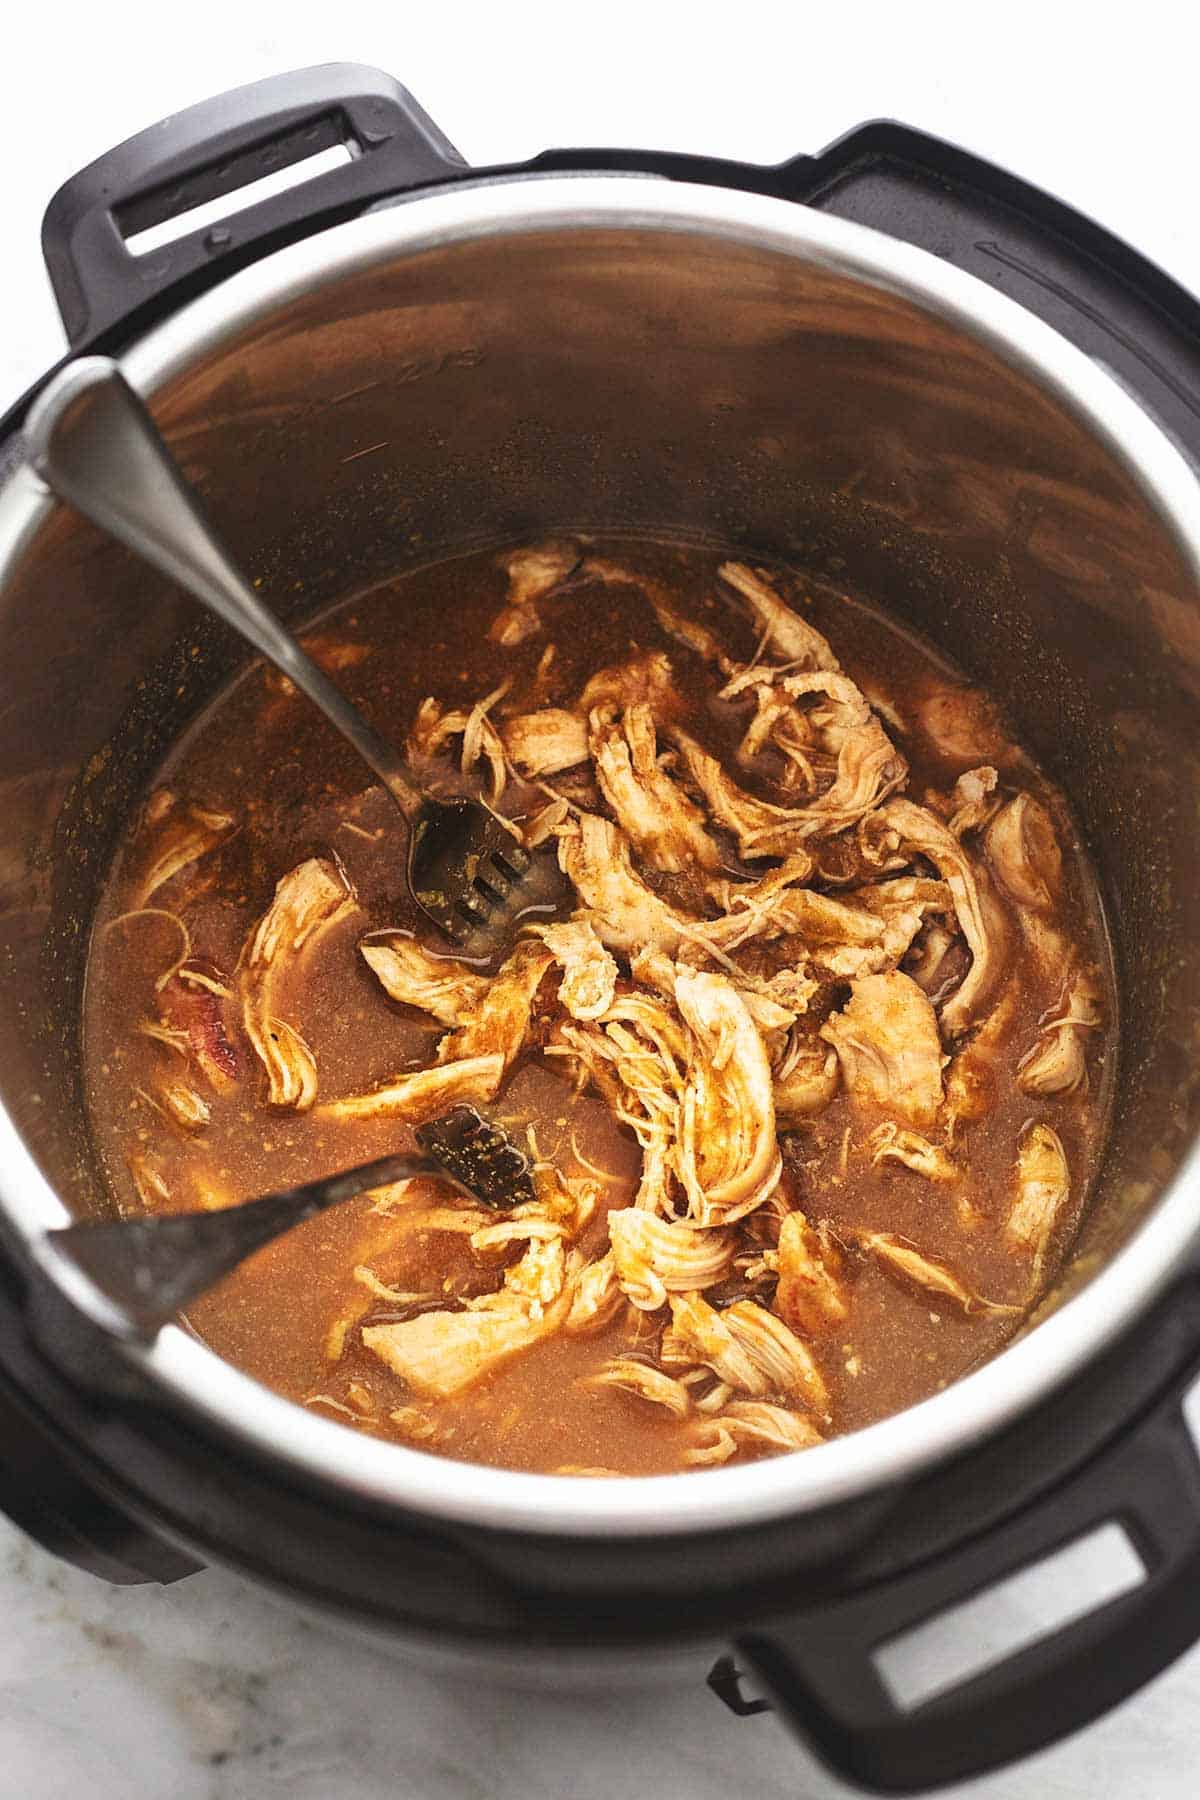 top view of shredded chicken with two forks in brown liquid inside a slow cooker.